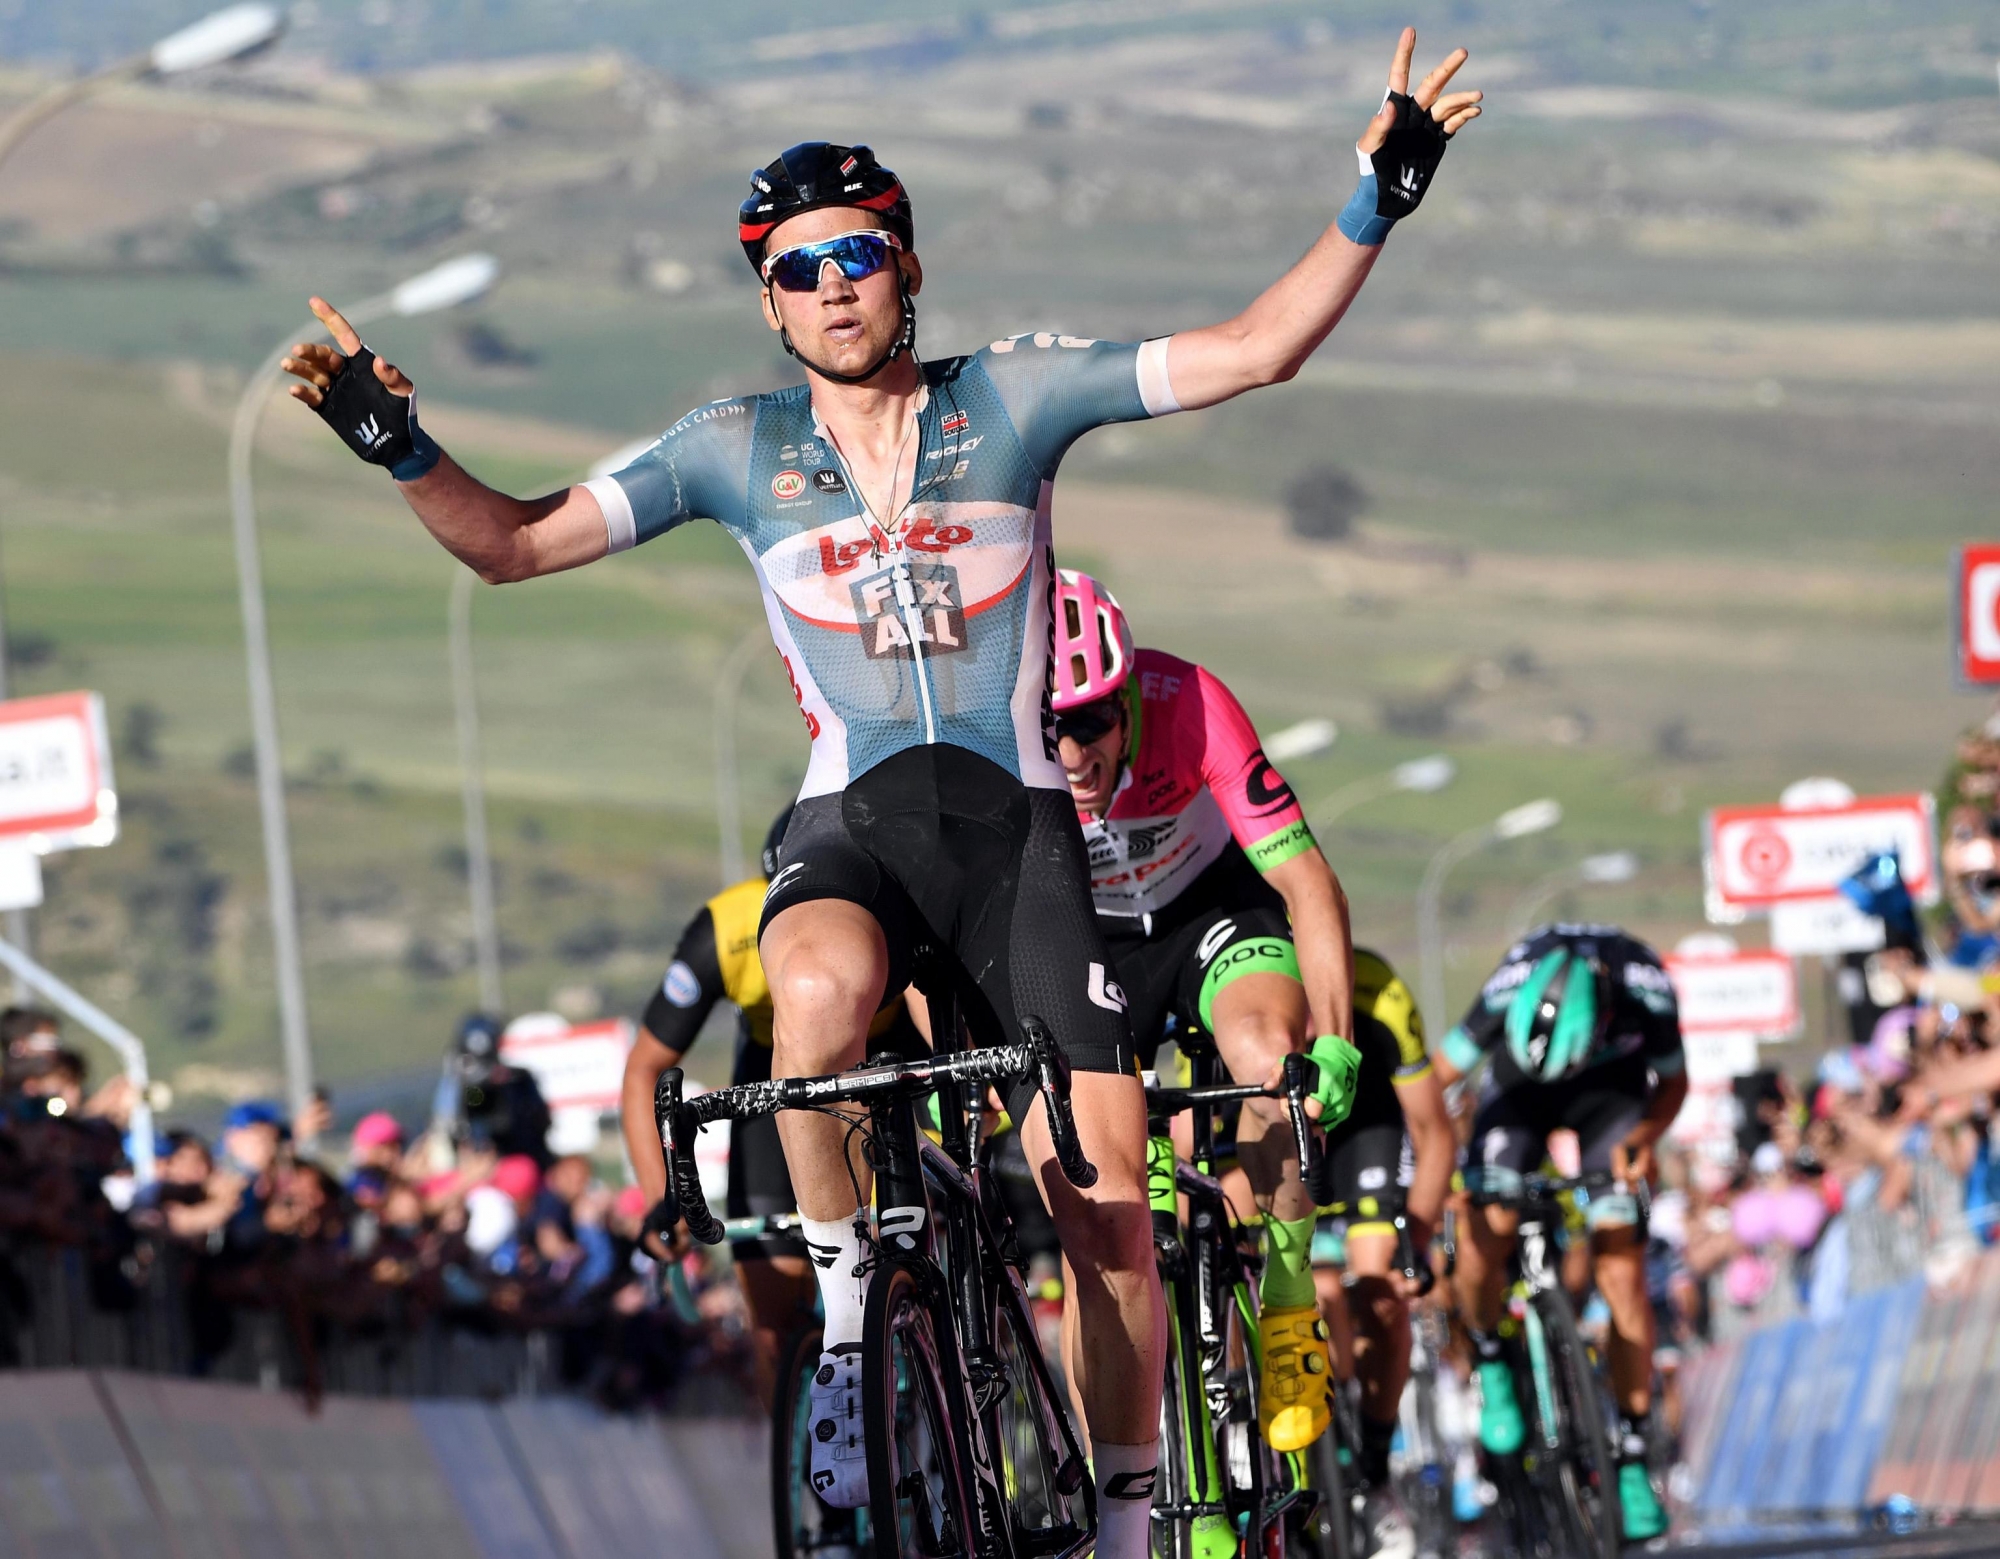 epa06719667 Belgian rider Tim Wellens of Lotto-Fix All celebrates as he crosses the finish line to win the fourth stage of the Giro d'Italia cycling race, over 202km from Catania to Caltagirone, Sicily Island, Italy, 08 May 2018.  EPA/DANIEL DAL ZENNARO ITALY CYCLING GIRO D'ITALIA 2018